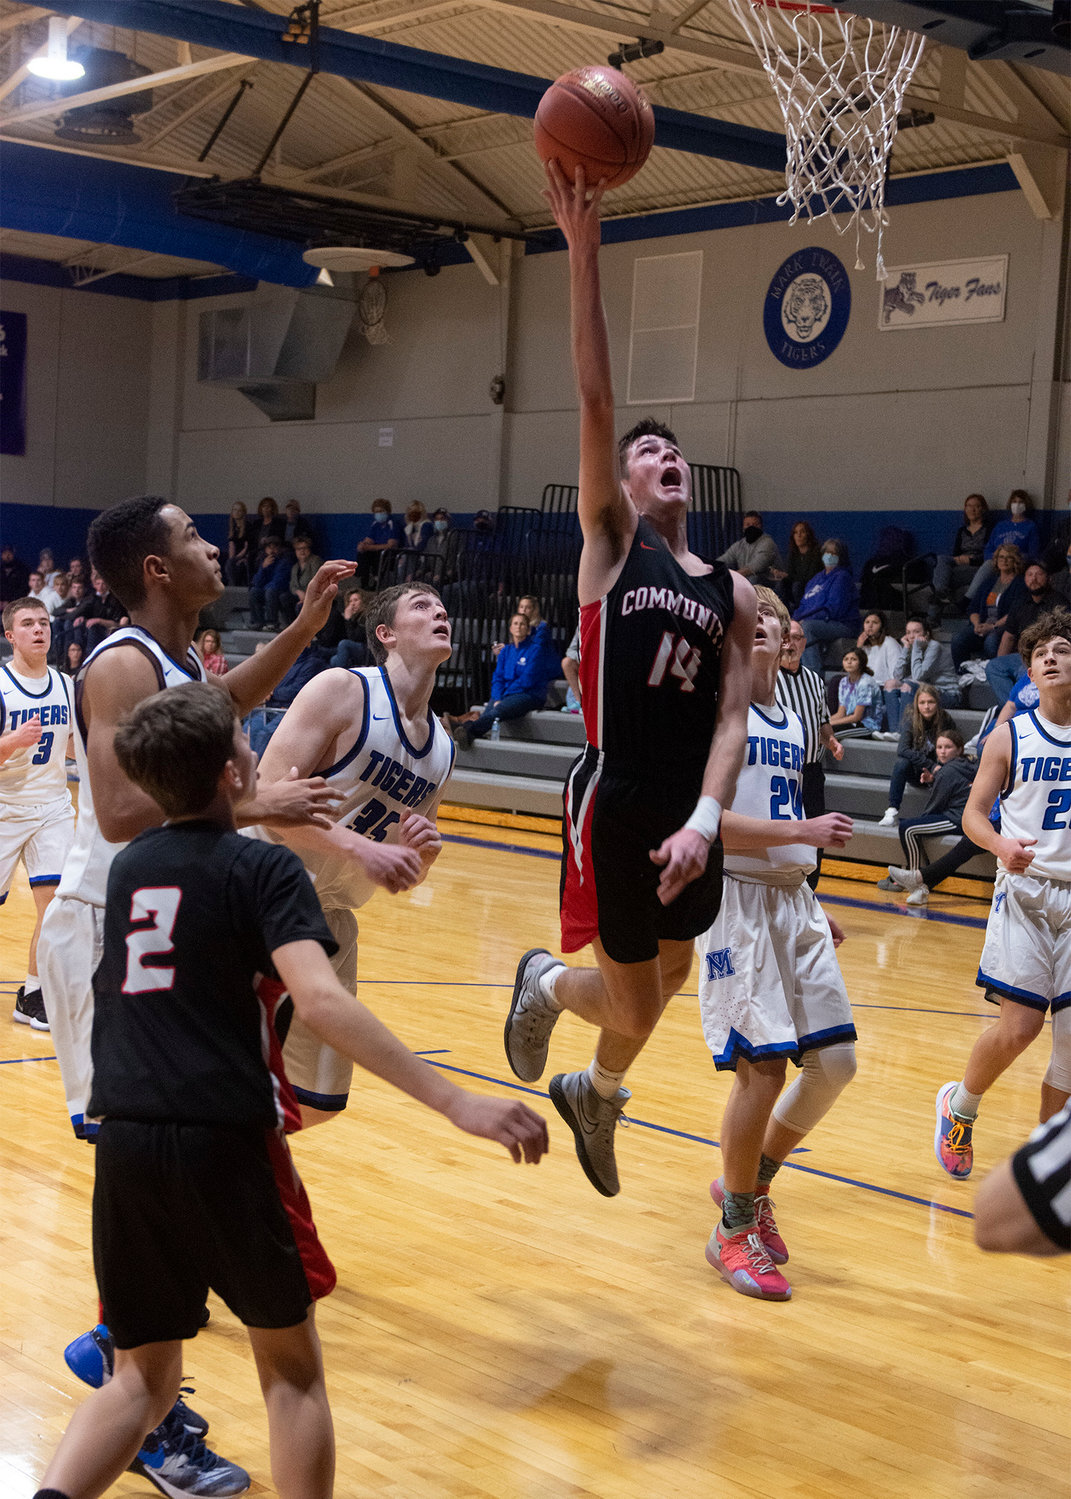 Sophomore forward Tucker Robnett goes up for the basket to score for the Trojans. [Leslie A Meyer Photography]